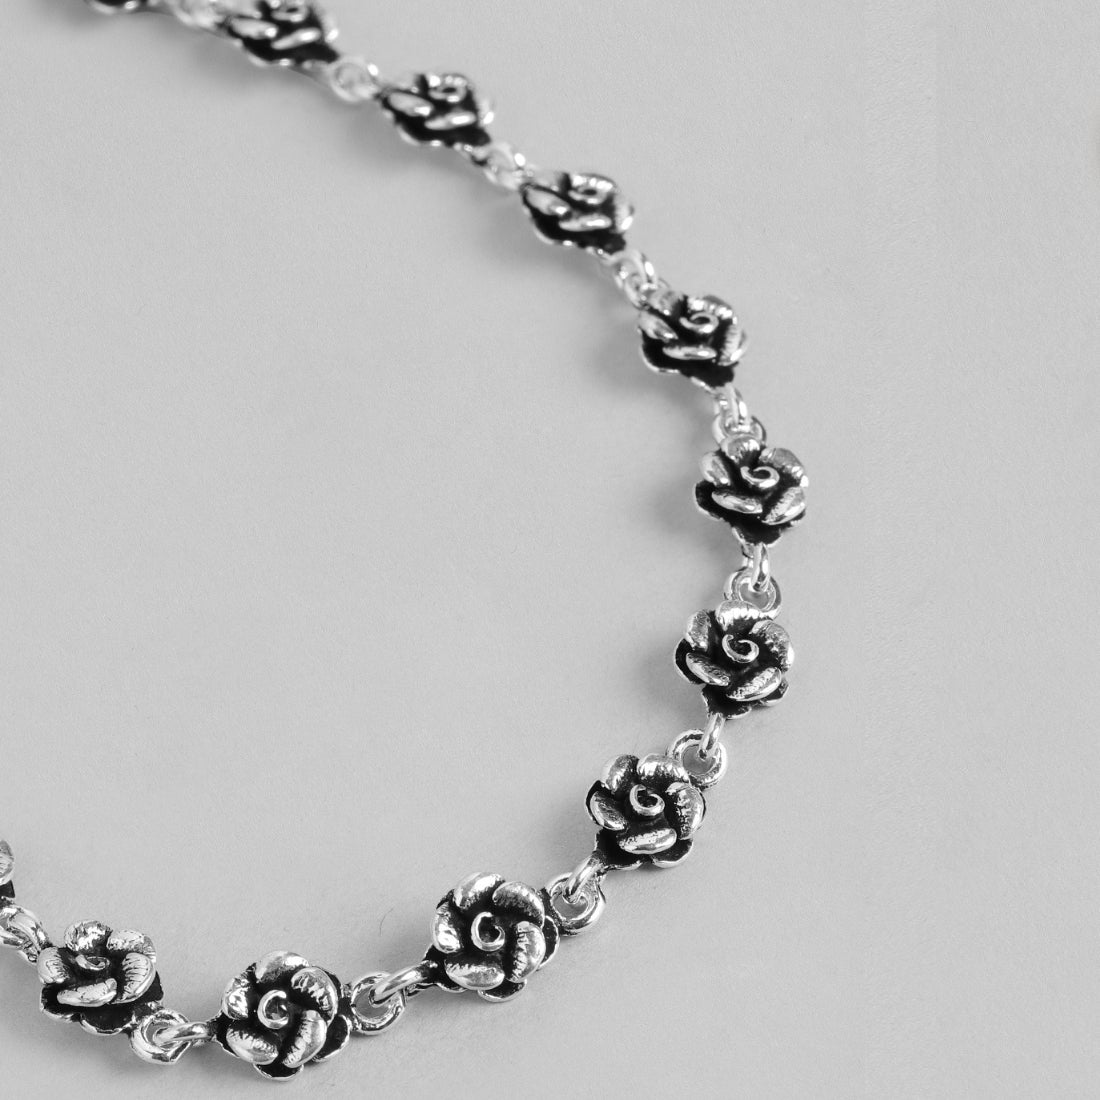 Floral Chained 925 Sterling Silver Anklets in Rhodium Plating